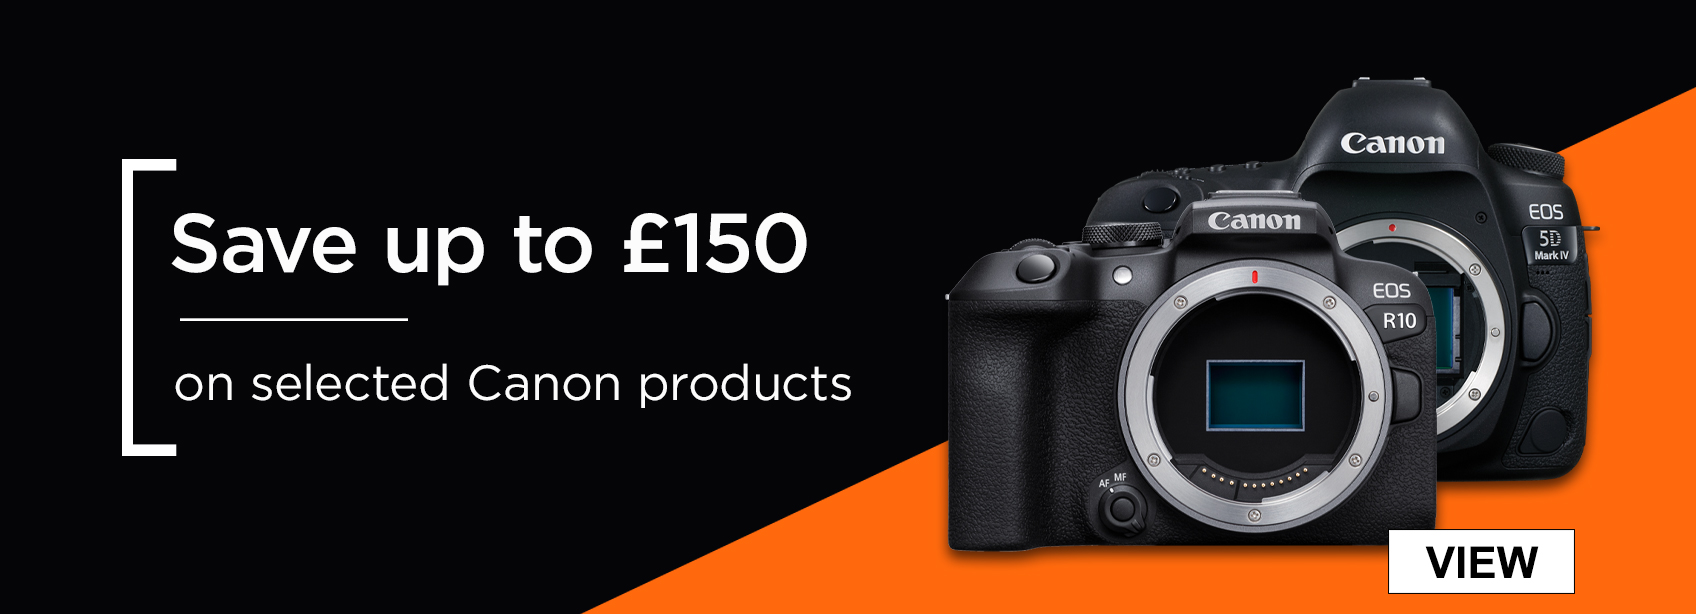 Save up to £150 on selected Canon products 